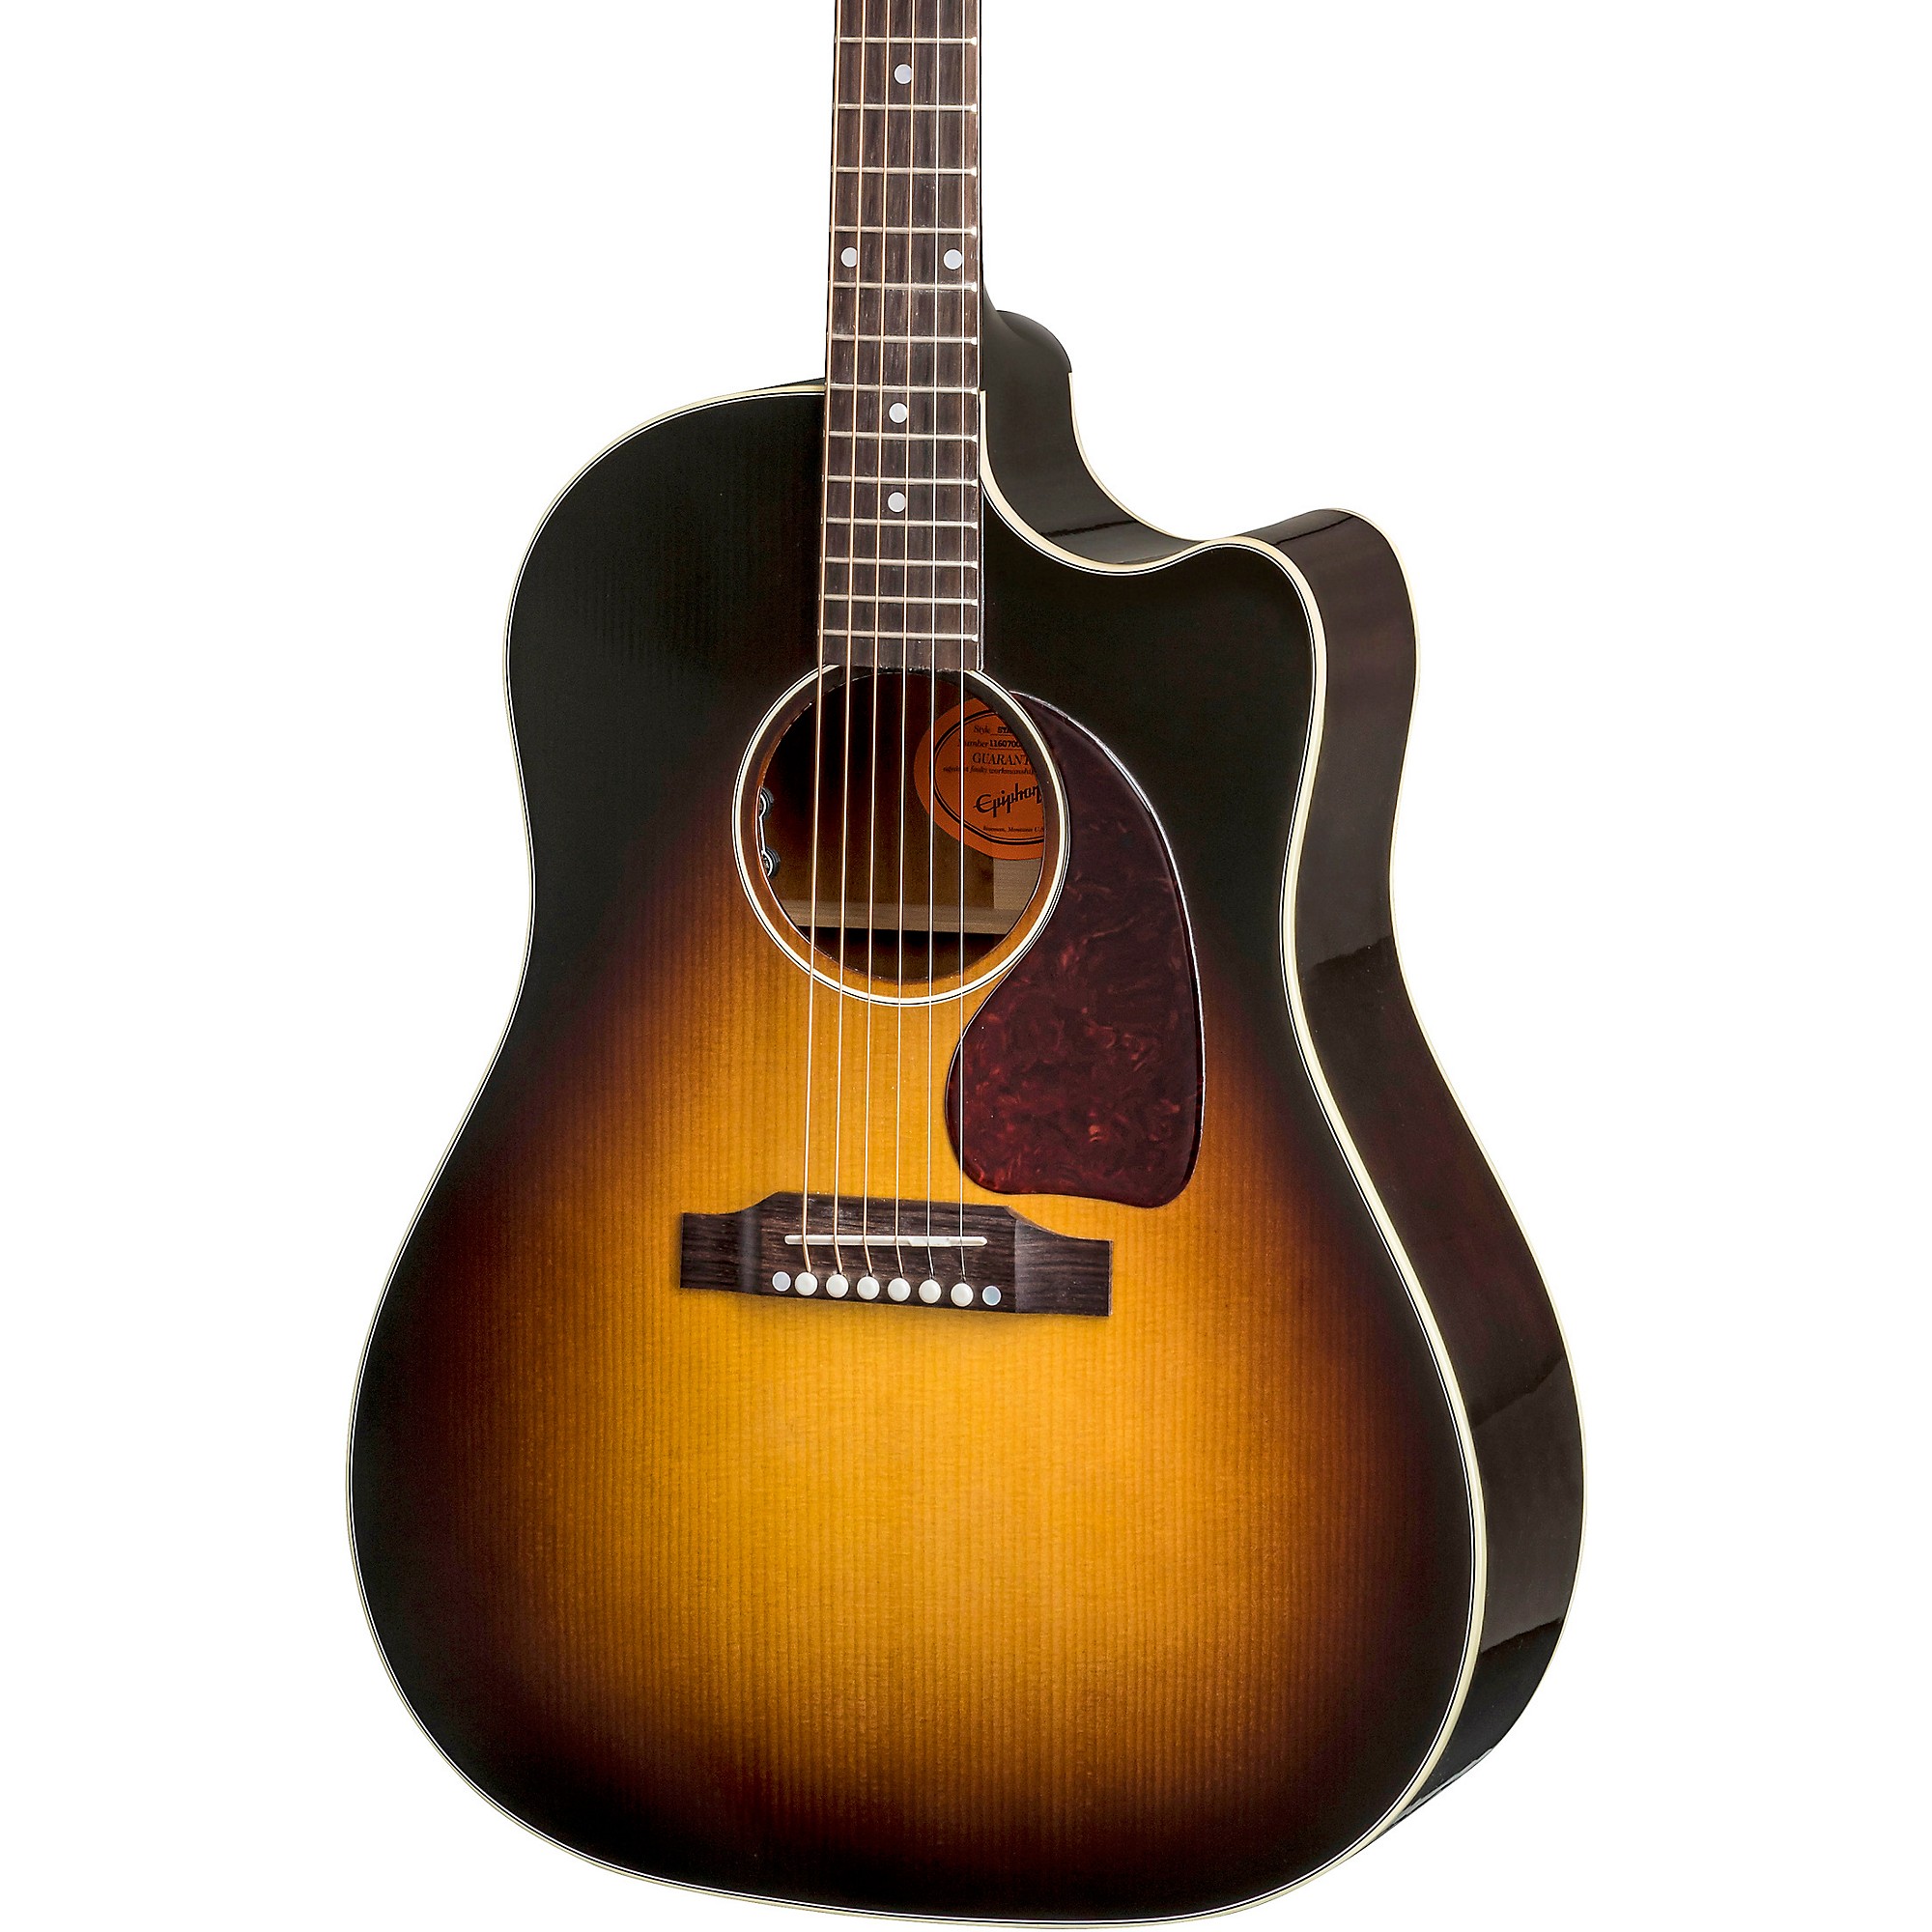 Epiphone Inspired by Gibson J-45 EC Acoustic-Electric Guitar Aged